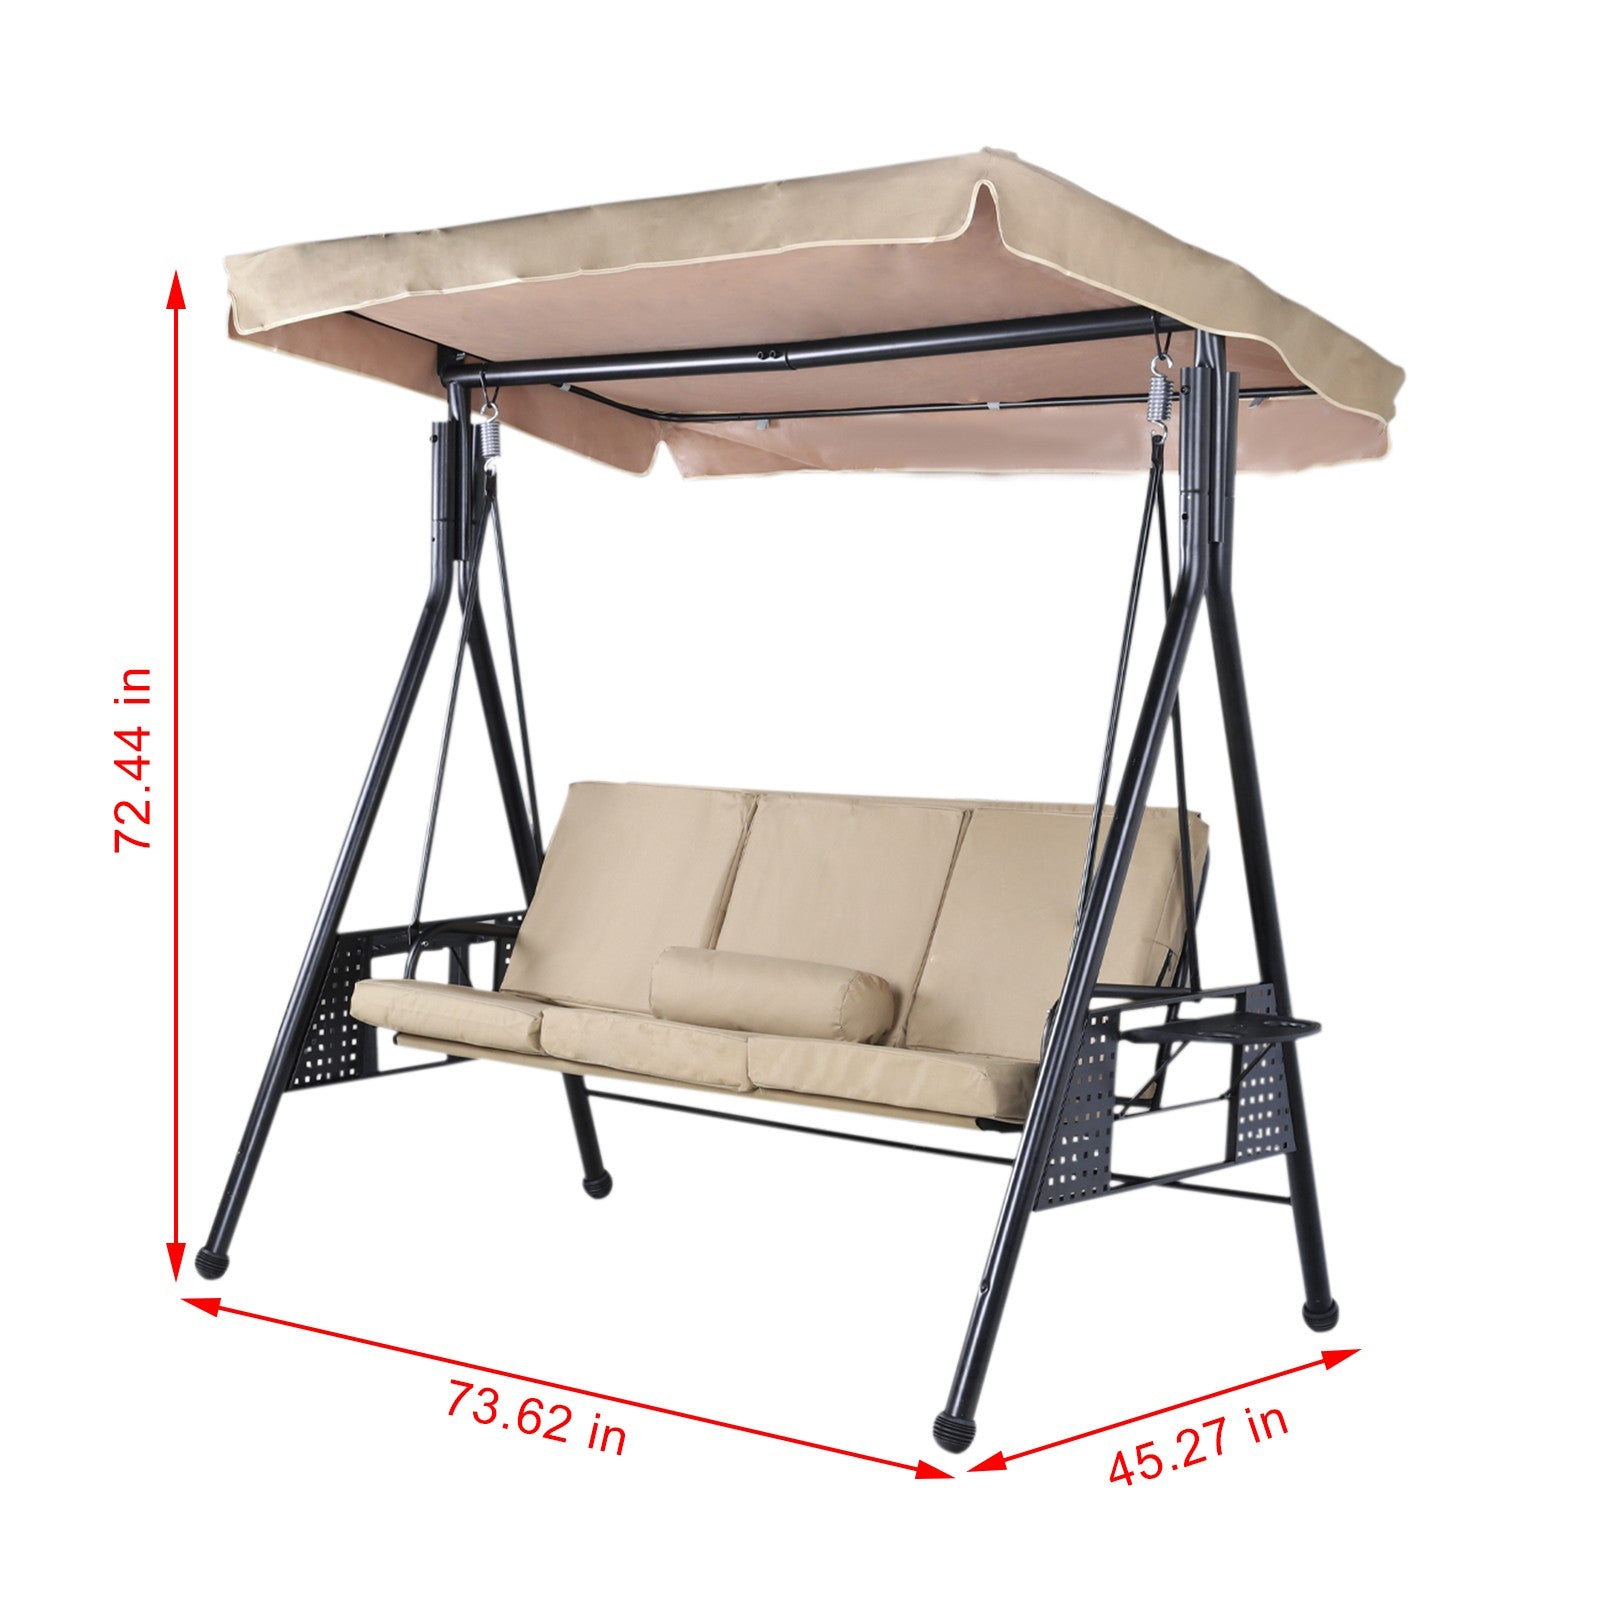 3-Seat Deluxe Outdoor Patio Porch Swing With Weather Resistant Steel Frame US